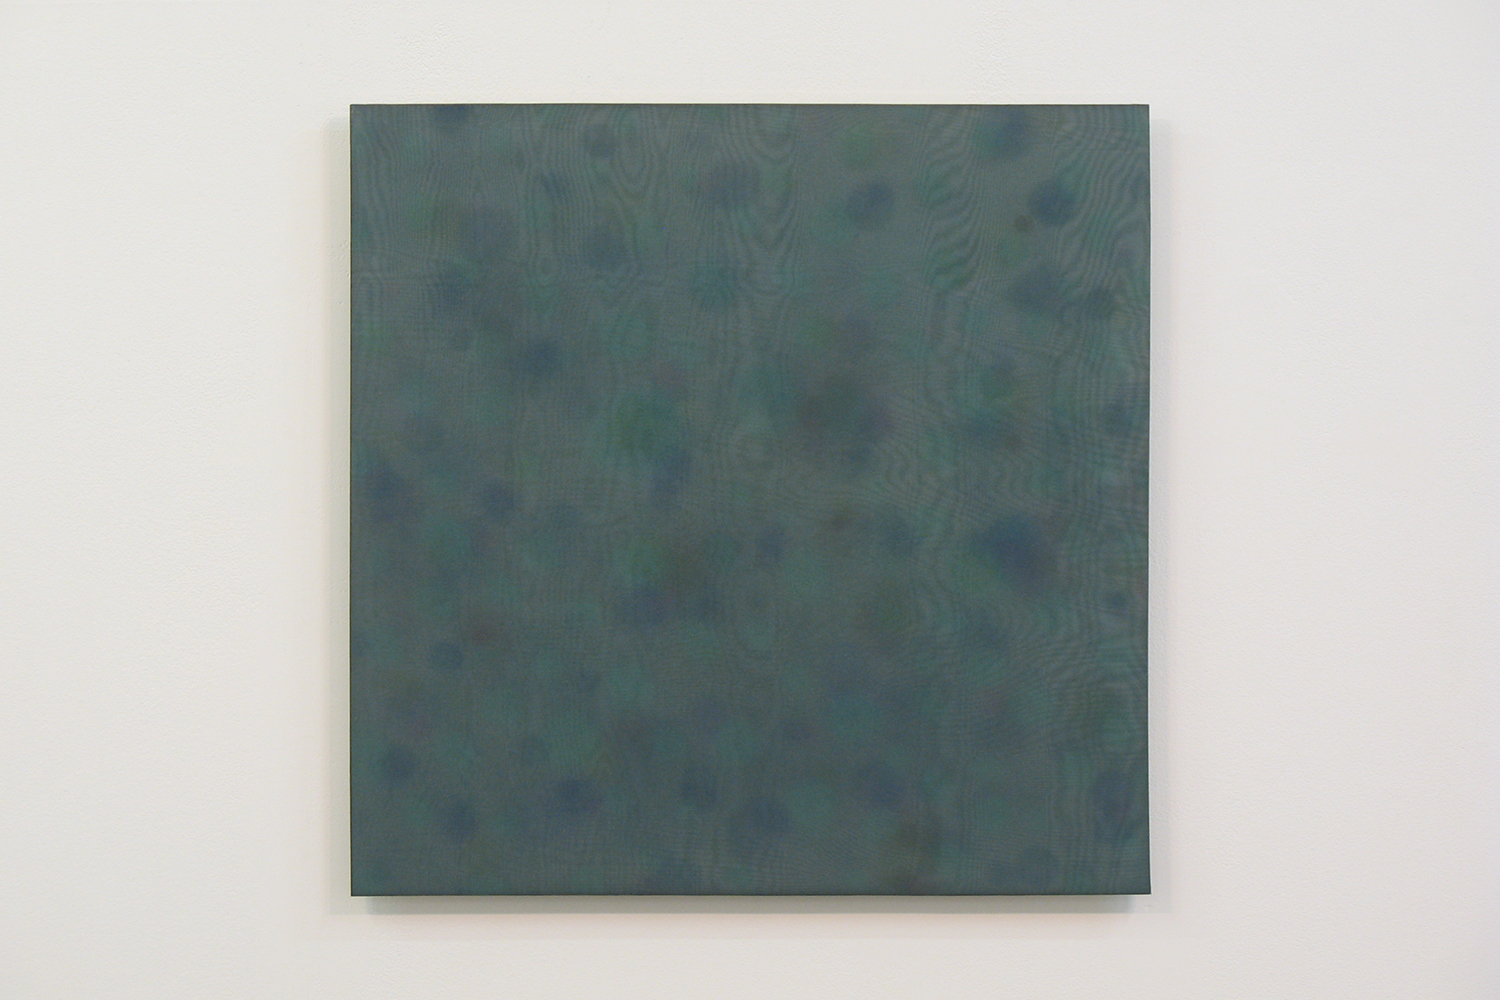 Untitled C｜Acrylic board, stainless steel sheet, glass organdy, acrylic paint｜60 x 60 cm｜2011<br>¥150,000 - 400,000